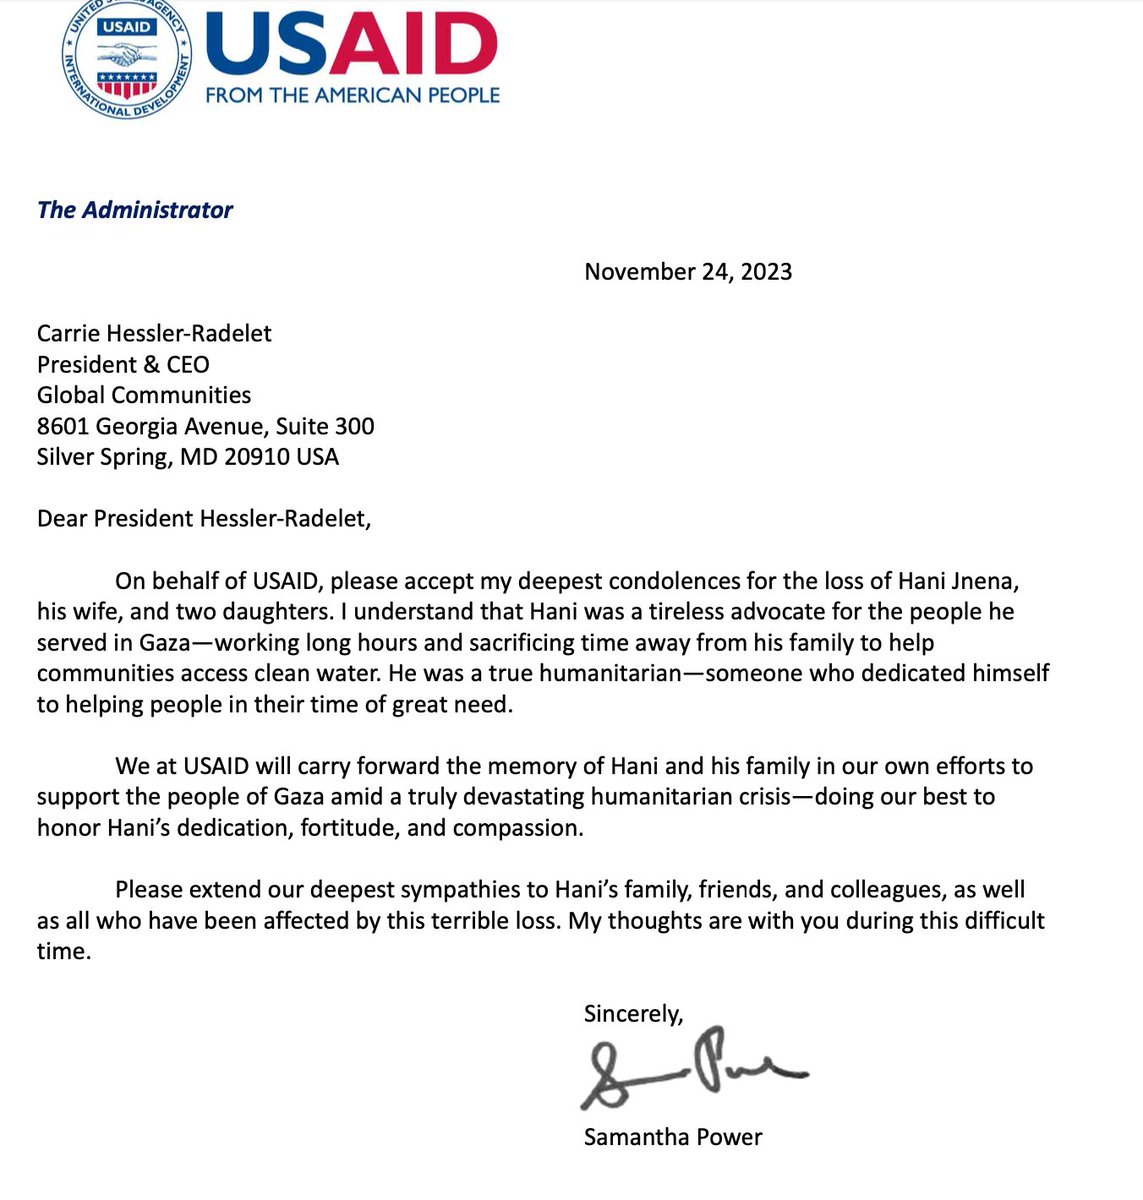 Several USAID employees expressed dismay Jnena's death was not acknowledged by the agency publicly. USAID chief Samantha Power has been aware of his death since at least late Nov, when she sent a condolence letter to the CEO of the USAID contractor he worked for. Obtained here: